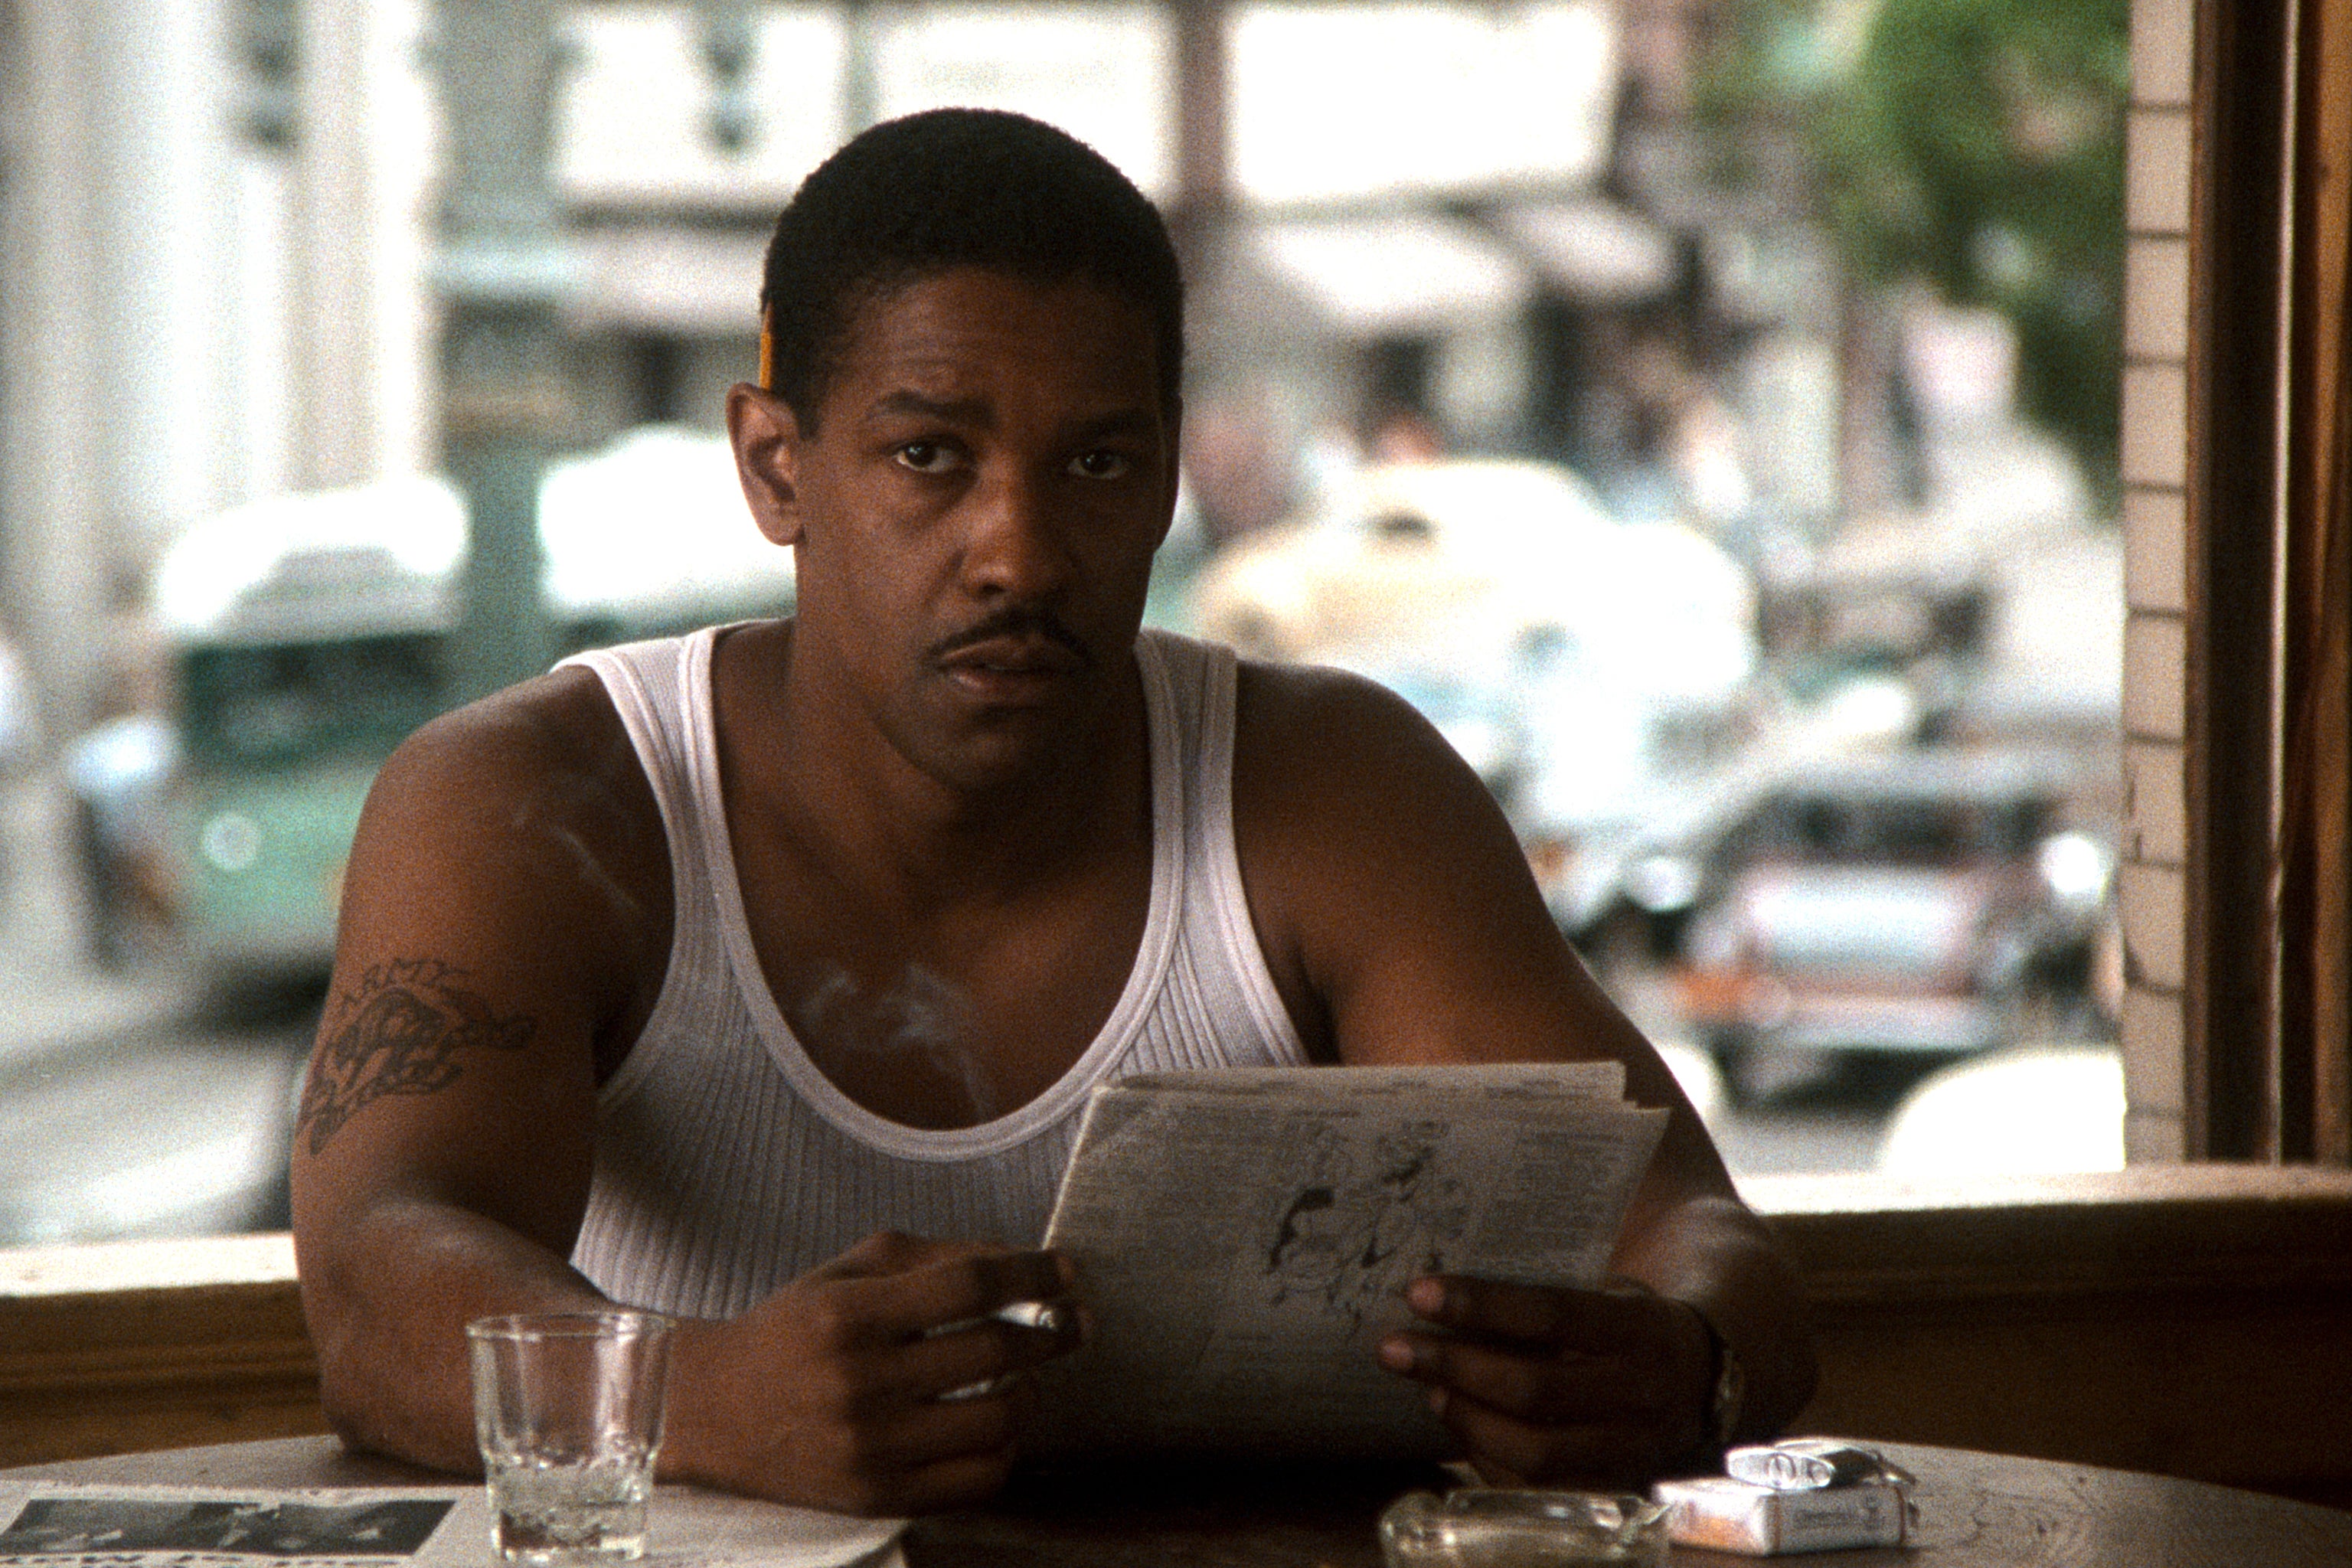 Denzel Washington looking up from reading a newspaper.